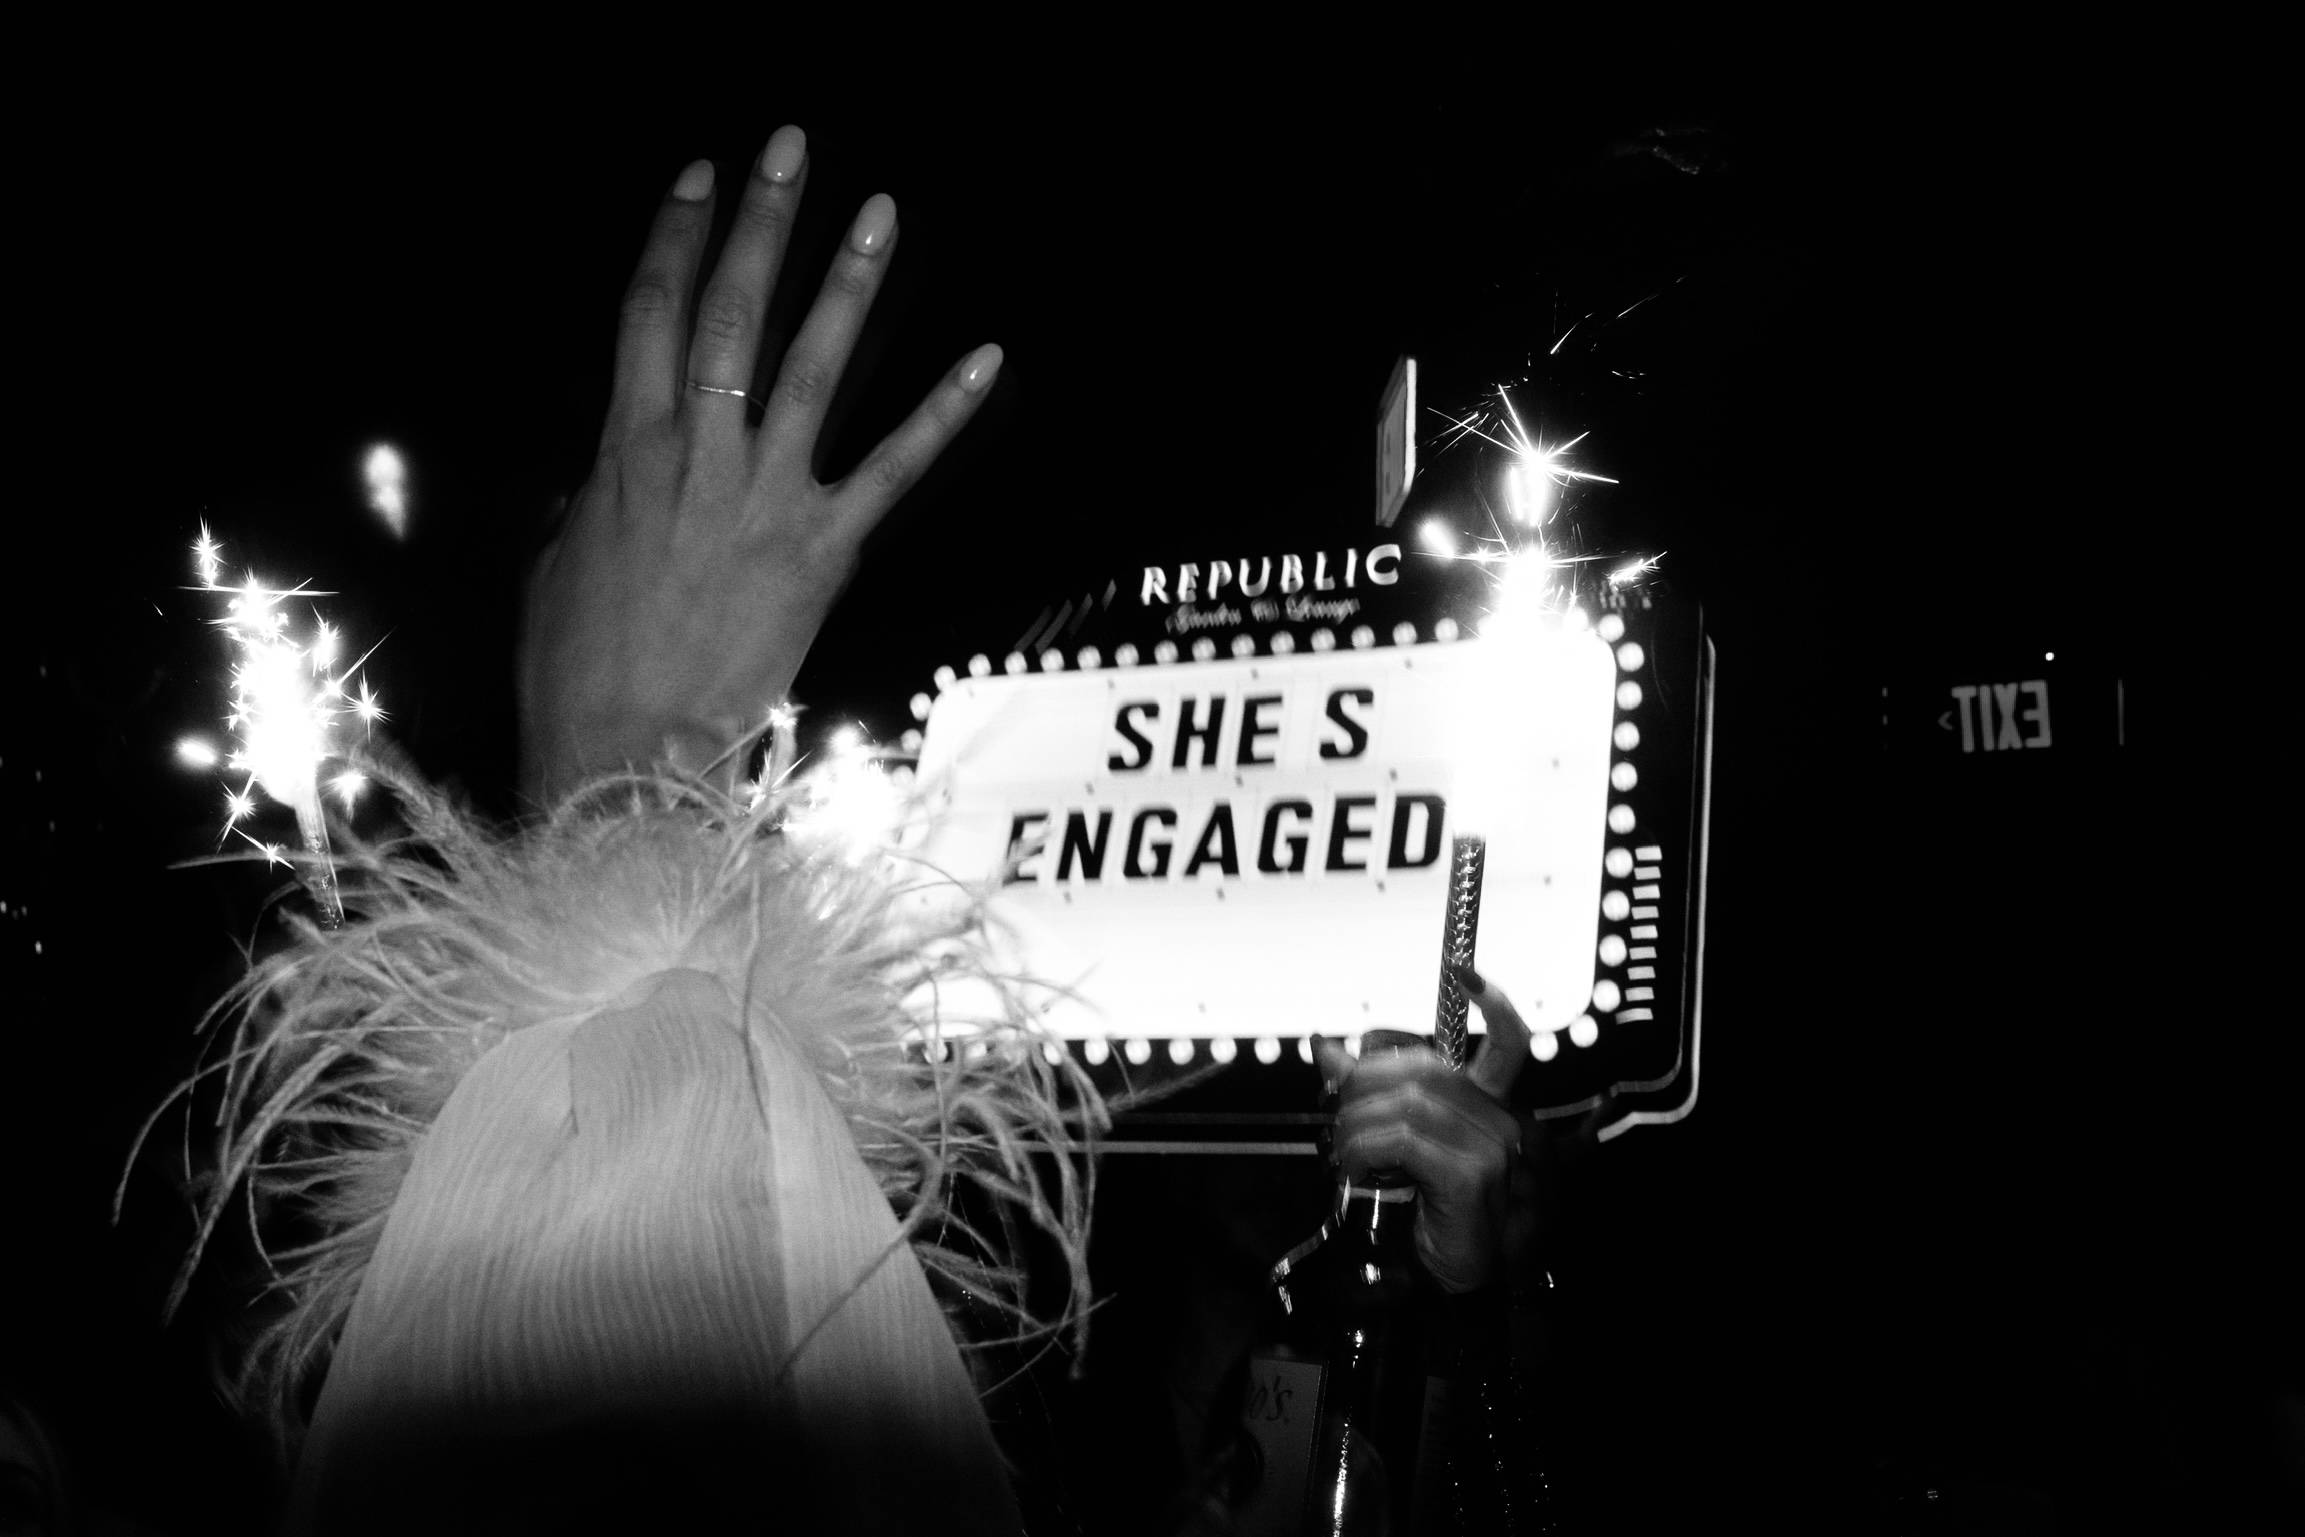 she's engaged sign in black and white